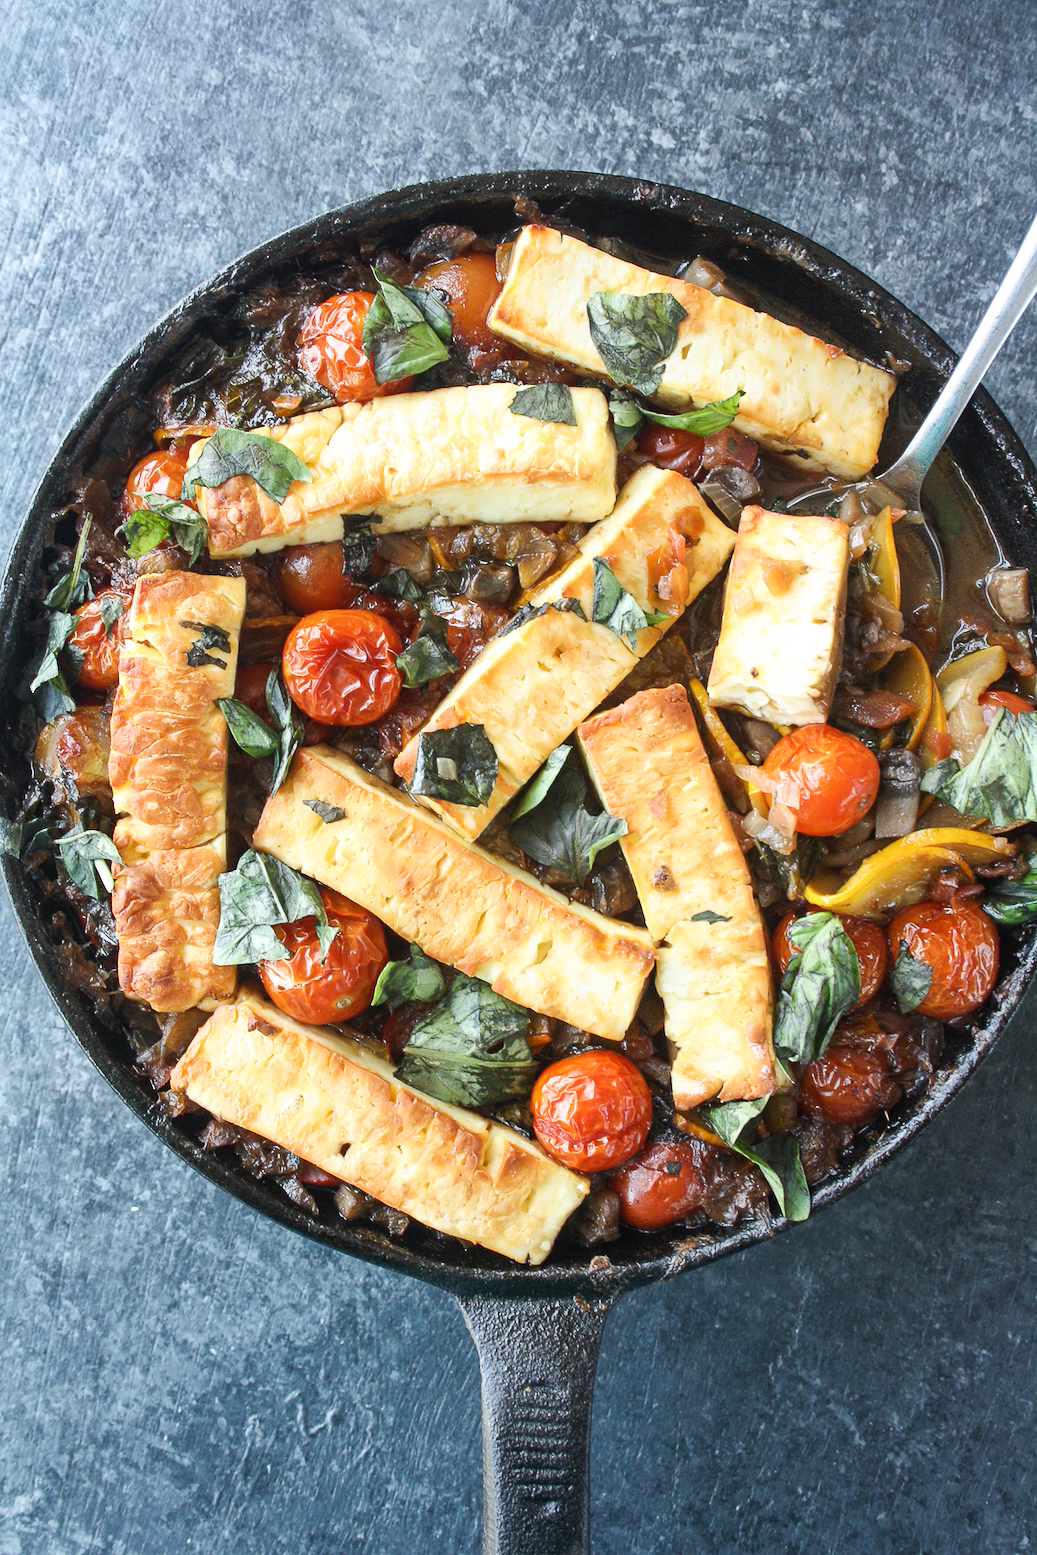 An easy baked dish with lots of fresh veggies, mushrooms and halloumi in a red wine sauce!